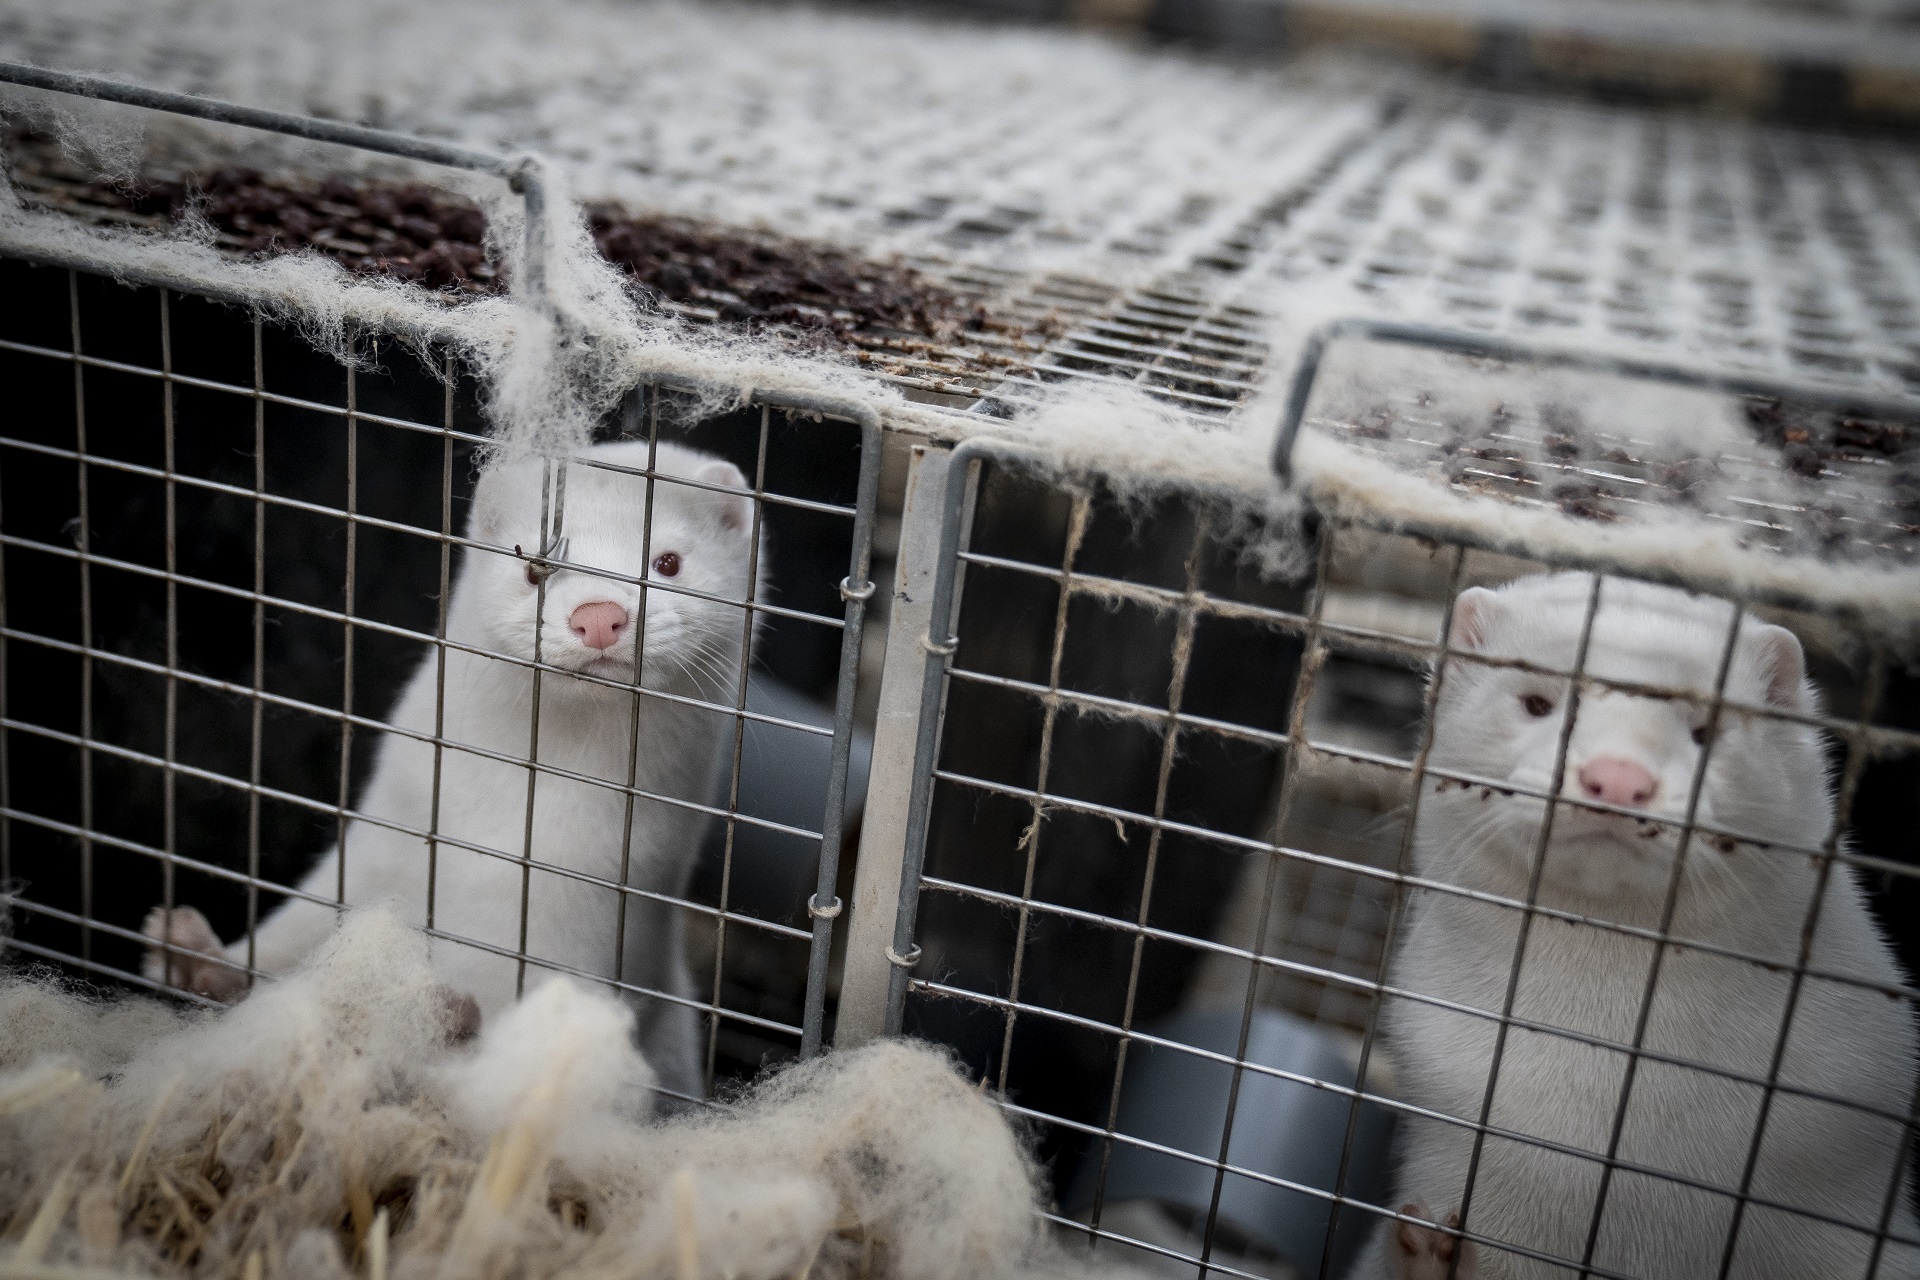 epa08803230 Live minks wait for their turn to be collected and processed to fur, at the mink fur farm which consists of 3000 mother minks and their cubs on their farm near Naestved, Denmark, 06 November 2020. The furs are stored in three freezers before selling them, as the minks on their farm are not affected by corona and there have been no corona cases in mink on Zealand and Funen. Mink farms throughout Denmark have been ordered by the government to cull all animals to prevent the spread of a new discovered mutated coronavirus.  EPA/Mads Claus Rasmussen  DENMARK OUT ATTENTION: This Image is part of a PHOTO SET